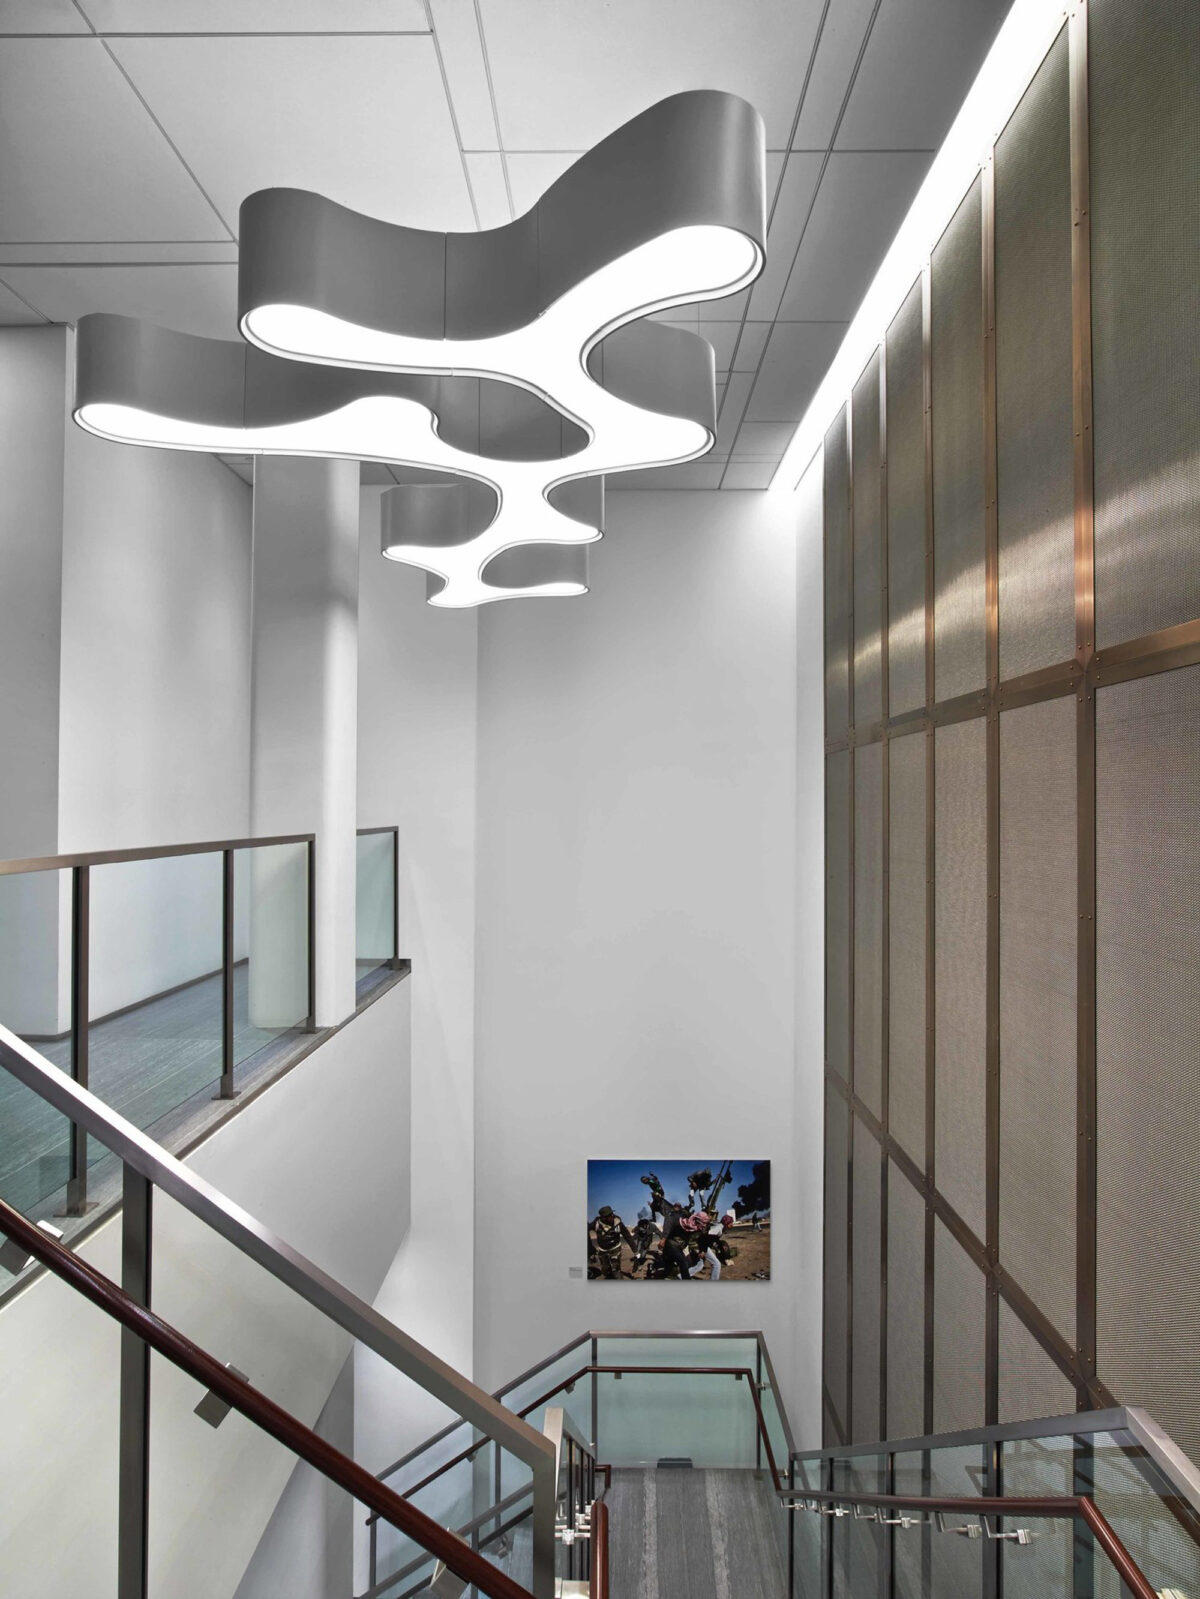 A modern interior with flowing, sculptural white LED light fixture suspended above a staircase with stainless steel handrails, glass balustrades, and wood-paneled walls, accented with a large photograph of motorcyclists on the lower landing wall.